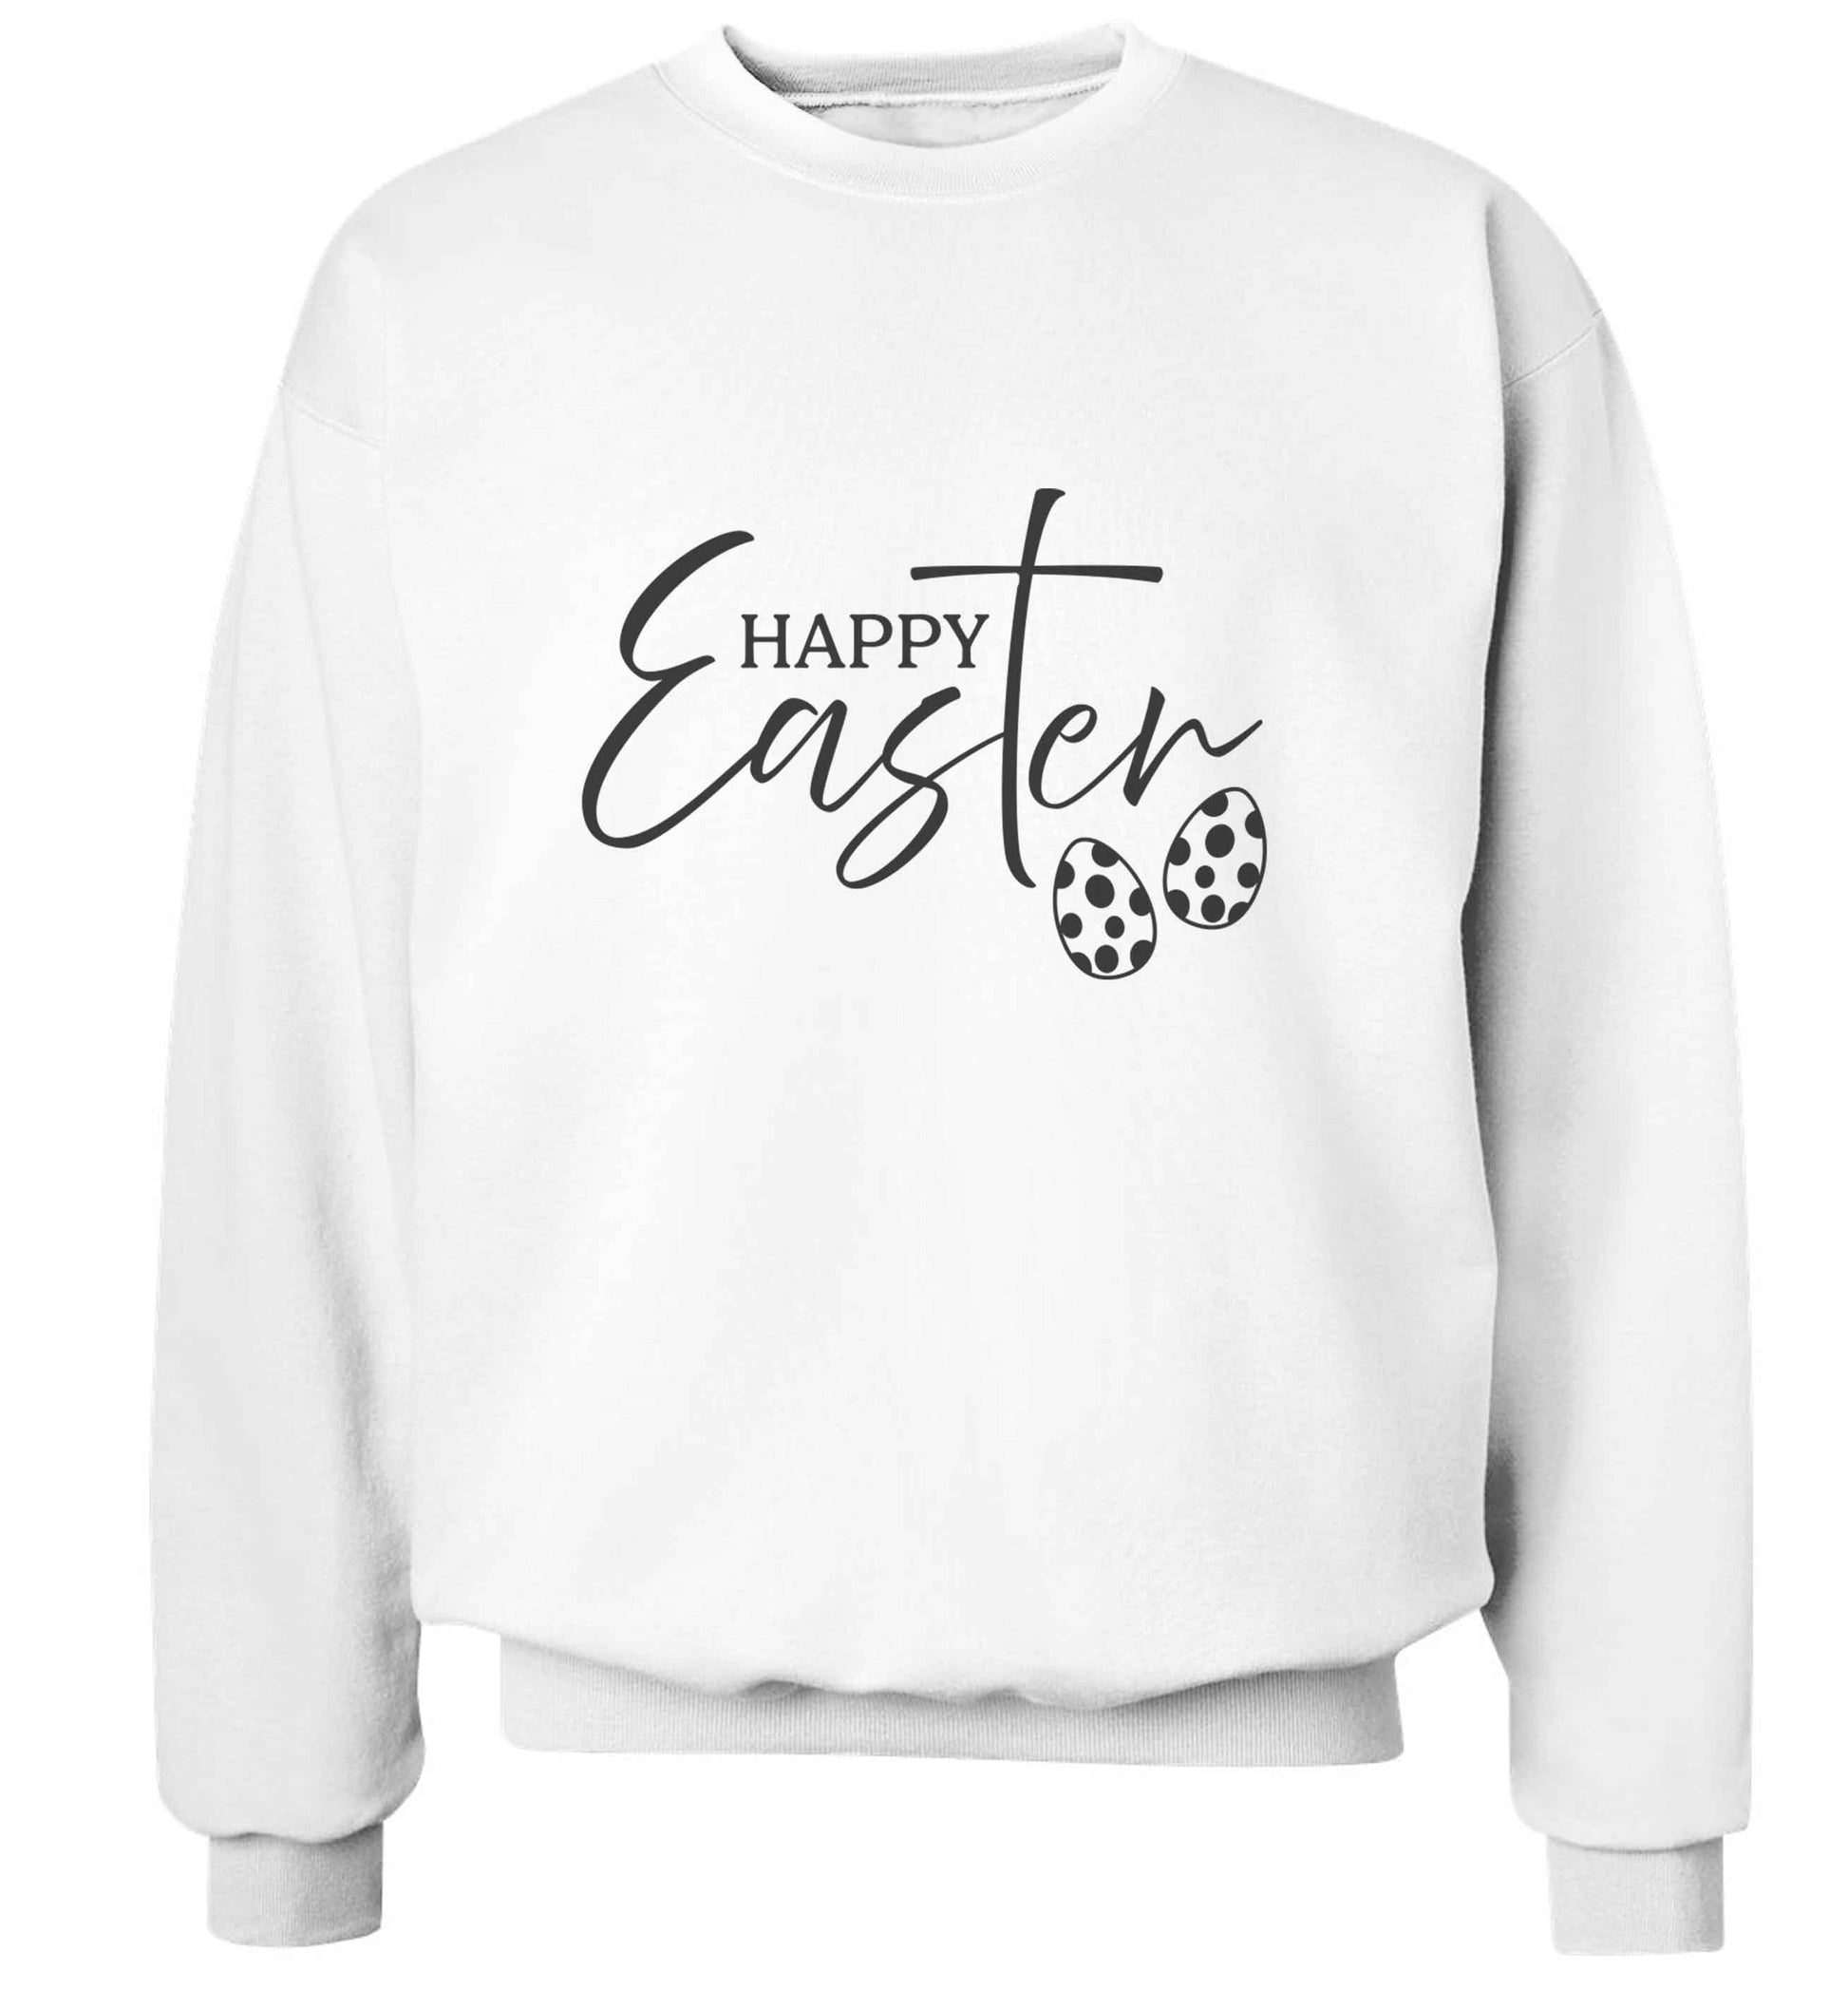 Happy Easter adult's unisex white sweater 2XL